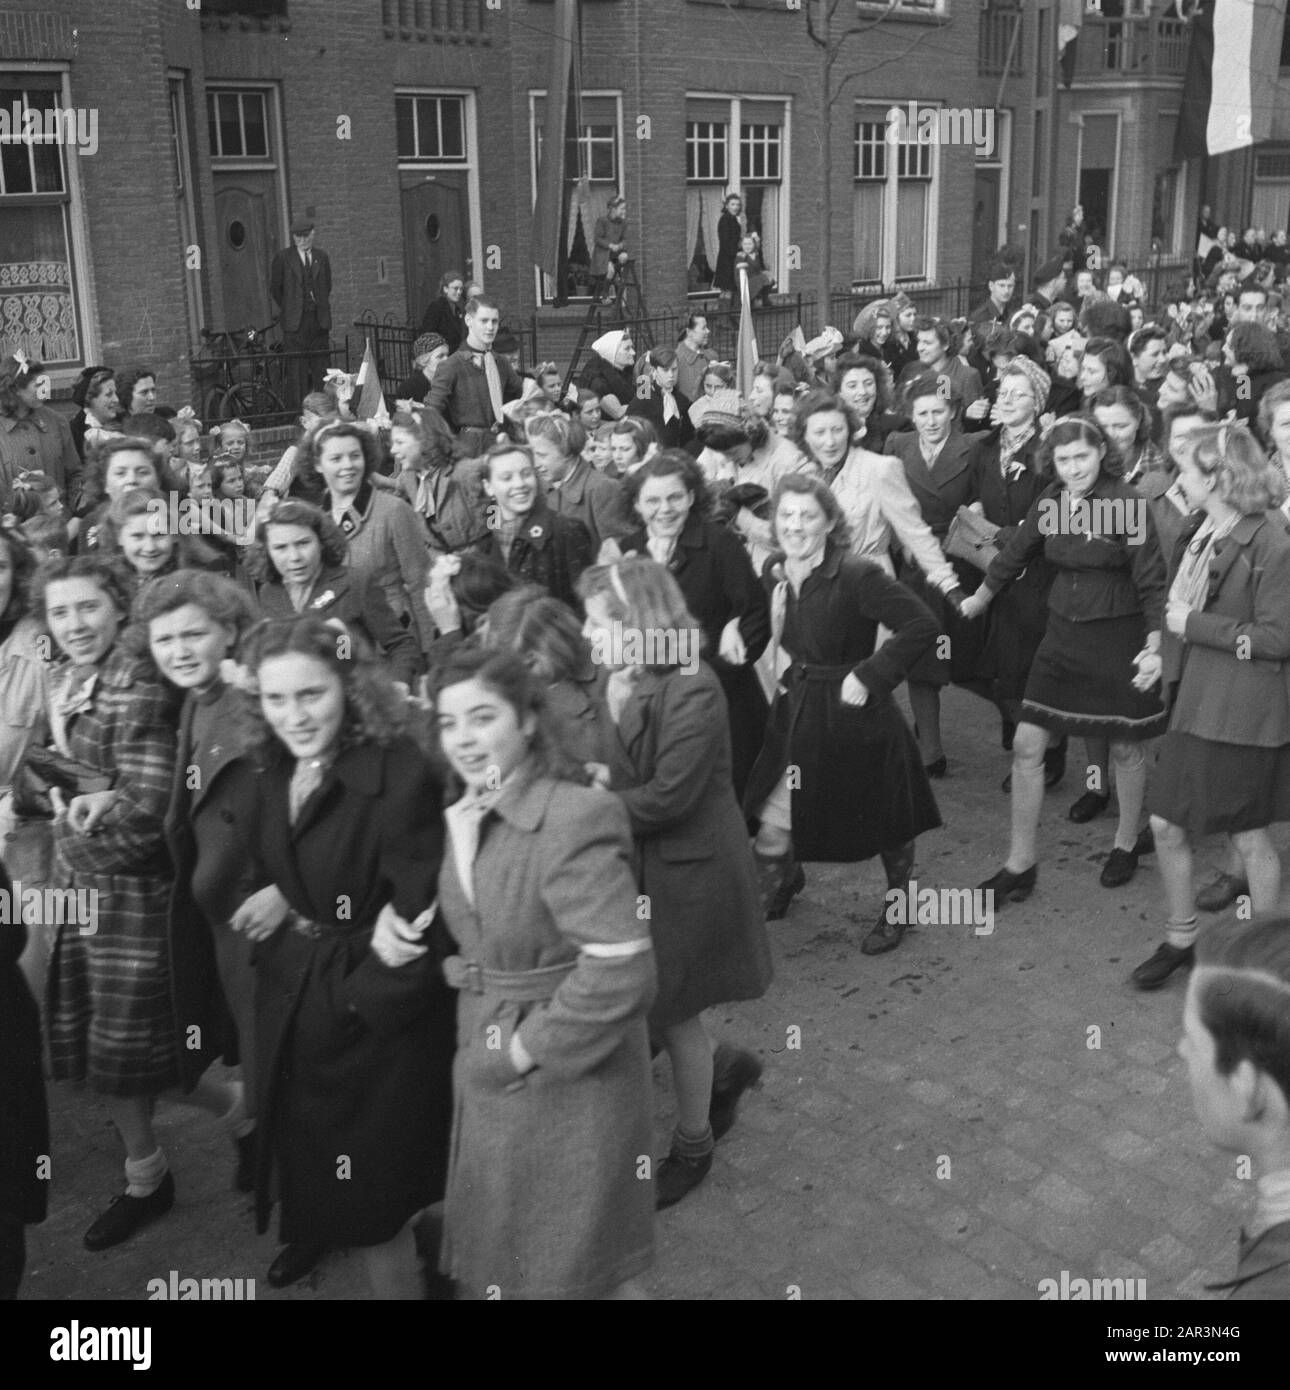 Tour of Queen Wilhelmina through liberated South Netherlands (Zeeland, Brabant and Limburg)  Young girls walk armed and hand in hand through a street Date: March 1945 Location: Zeeland Keywords: liberation, royal visits, girls, World War II Stock Photo